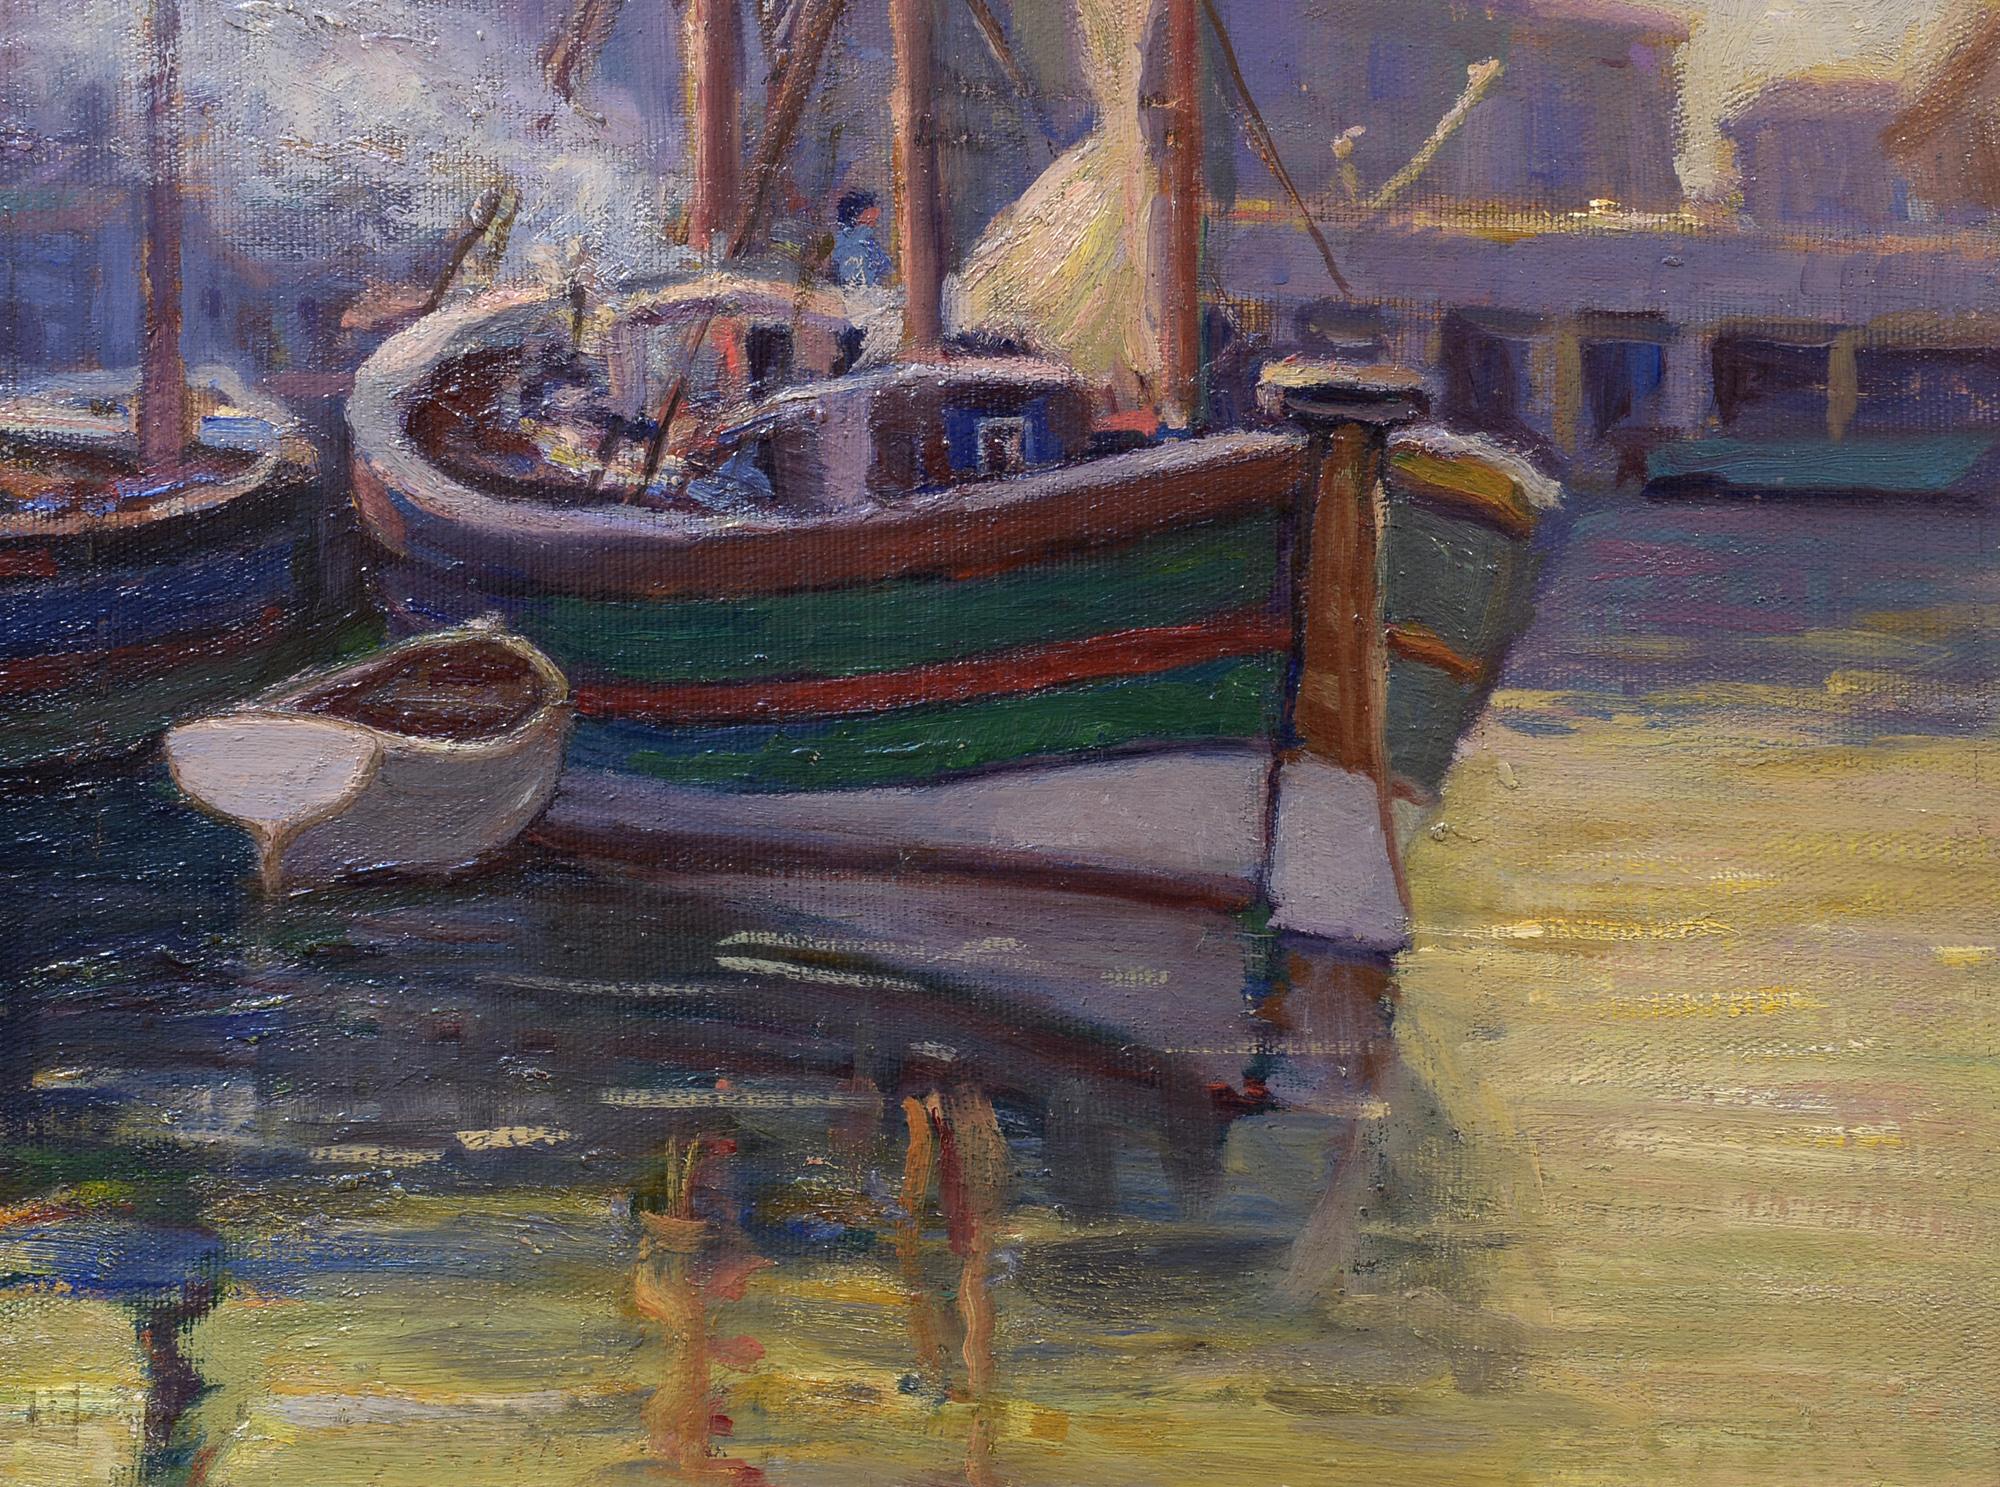 Unknown Landscape Painting - Harborfront, American Impressionist, 20th Century, Wooden Sailing Ships at Dock